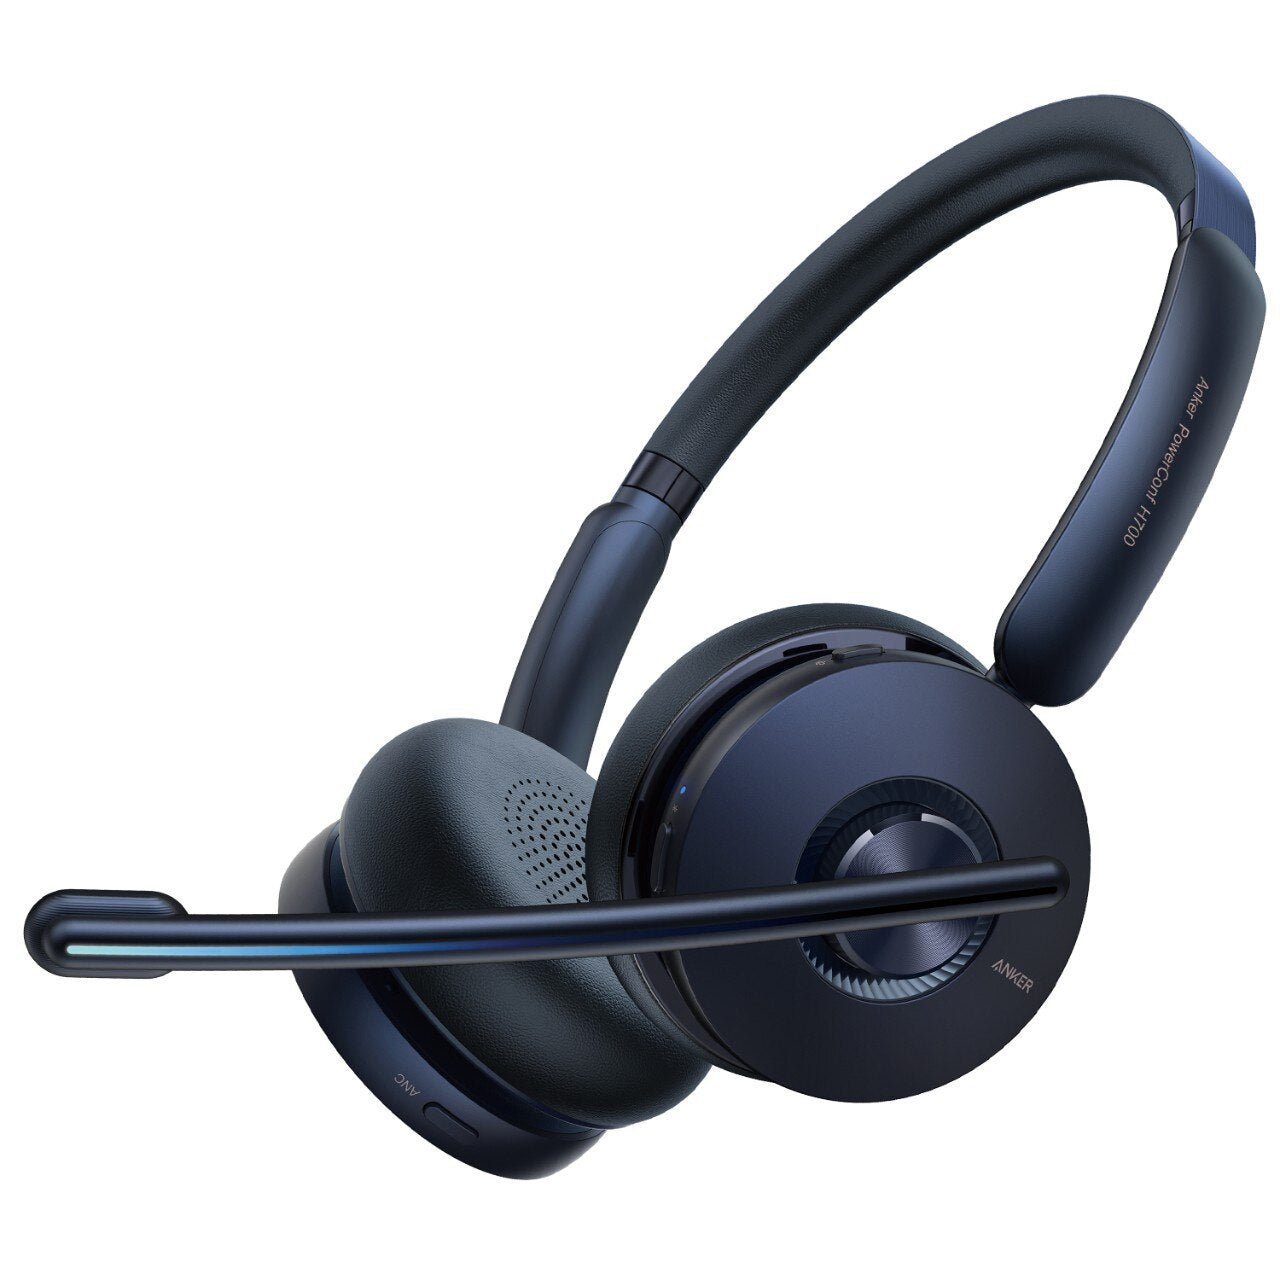 Anker PowerConf H700 Upgraded Version Bluetooth Headset